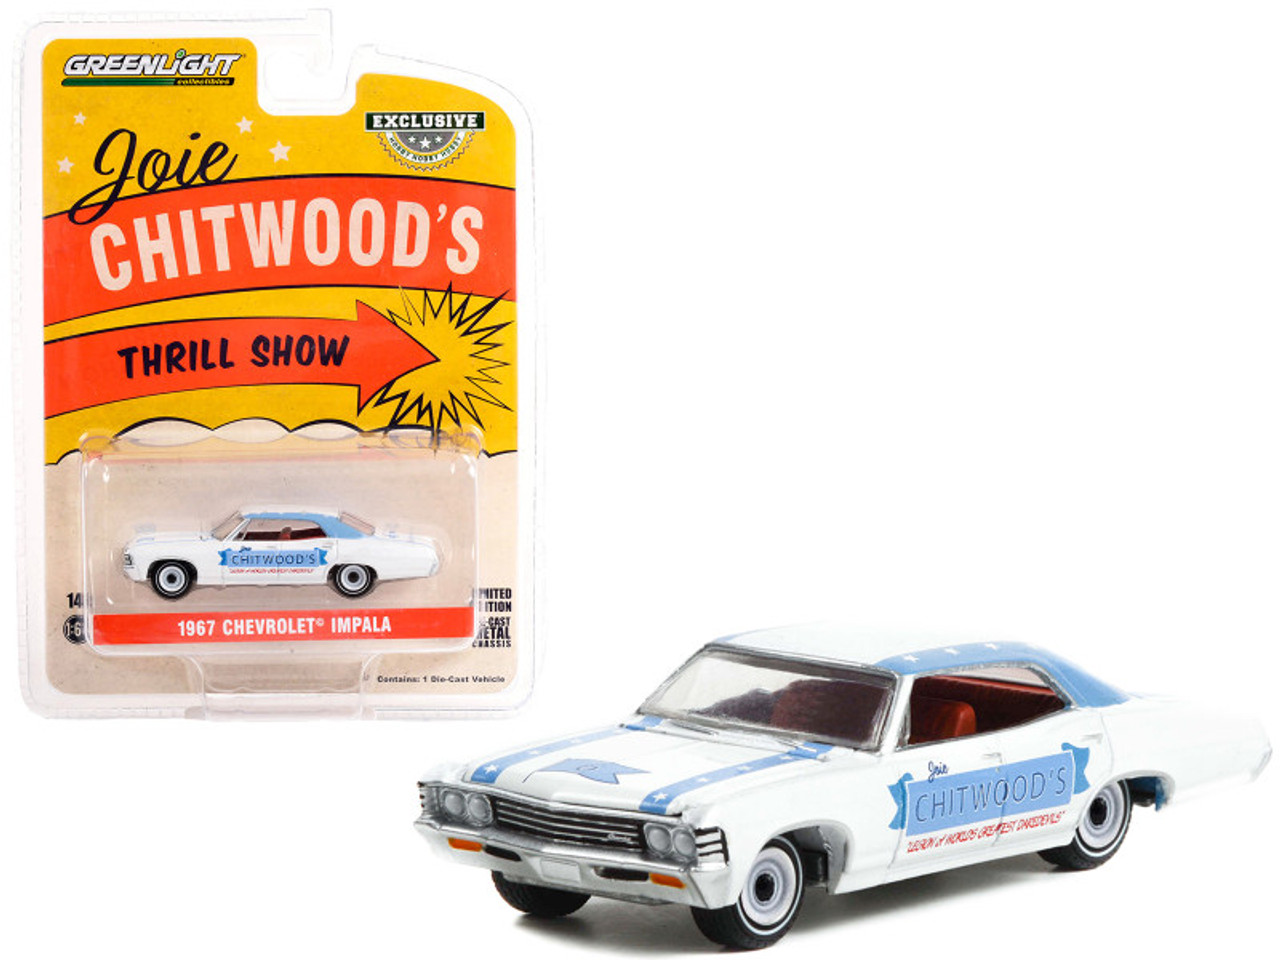 1967 Chevrolet Impala Sport Sedan White with Blue Stripes "Joie Chitwood’s Thrill Show: Legion of Worlds Greatest Daredevils" "Hobby Exclusive" Series 1/64 Diecast Model Car by Greenlight